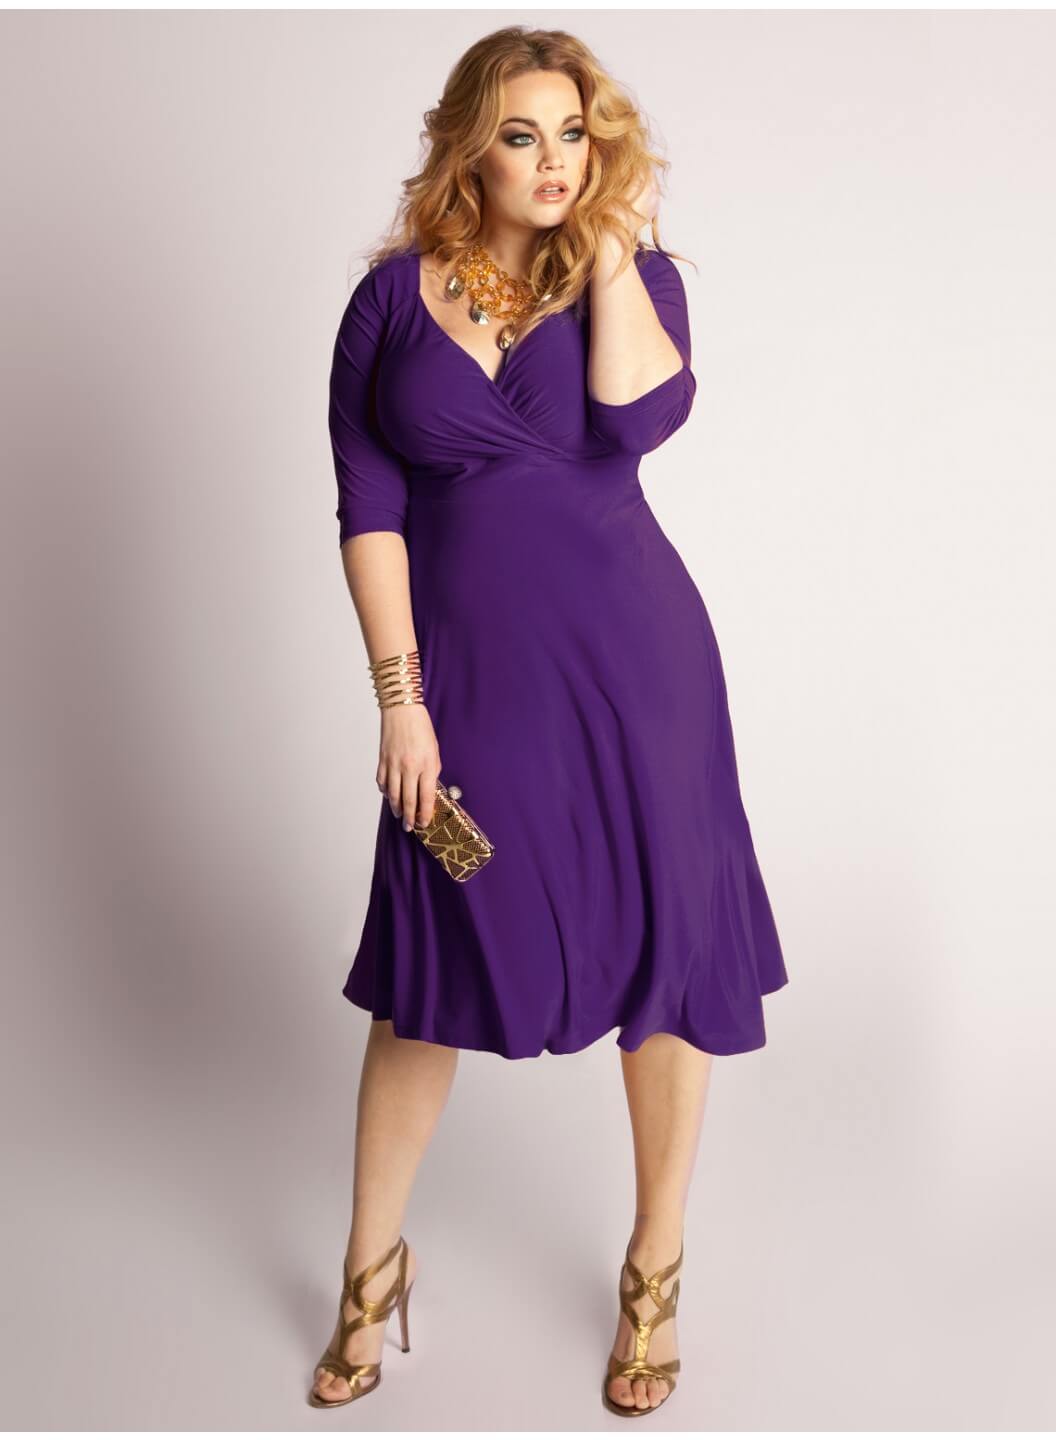 How To Pick The Best In Sexy Club Plus Size Dresses Trendy Dresses